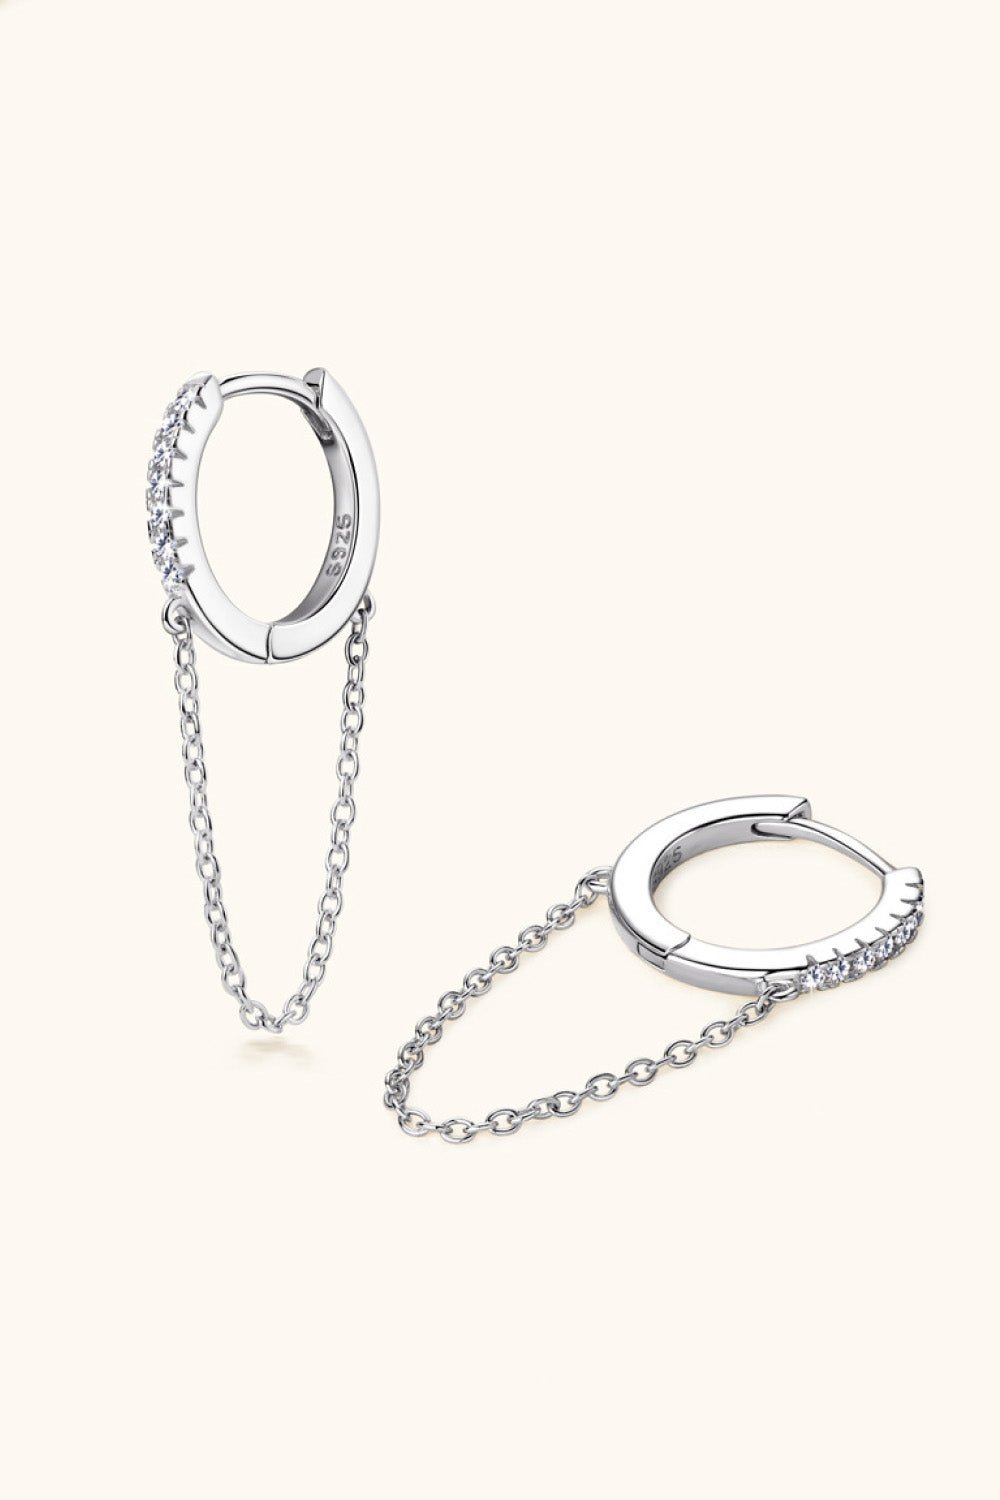 Moissanite 925 Sterling Silver Huggie Earrings with Chain - London's Closet Boutique